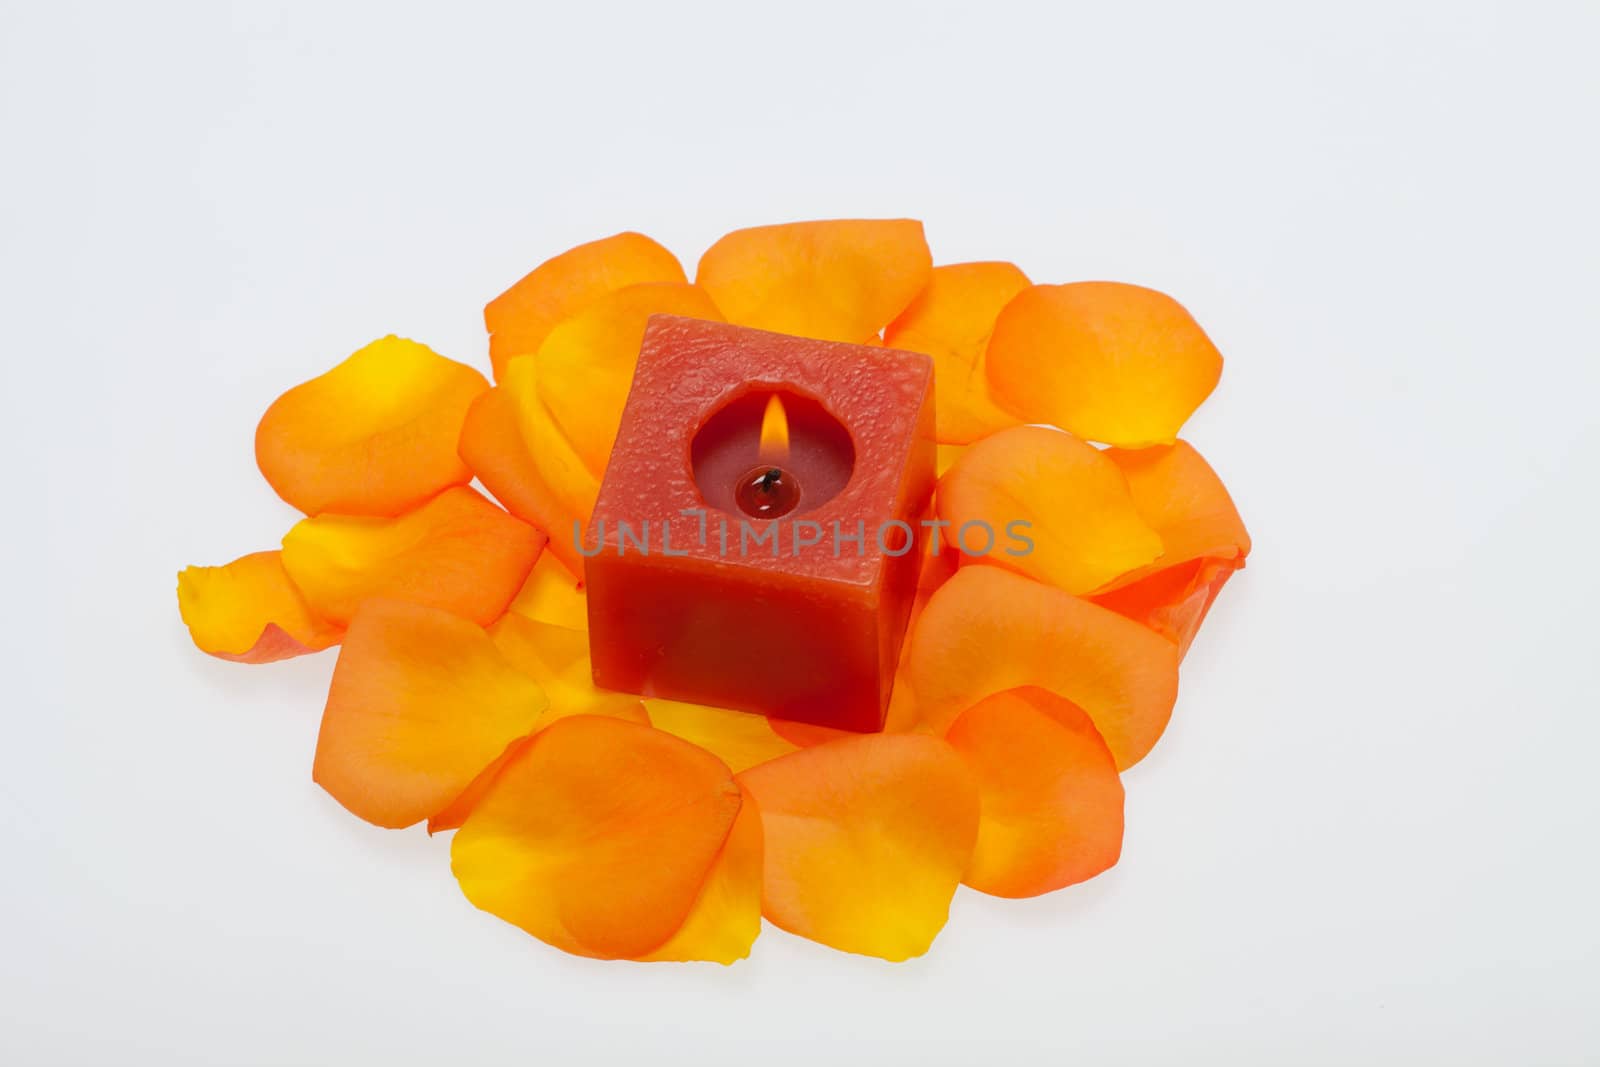 Spilt petals of the orange-rose around the aromatic candle by wjarek